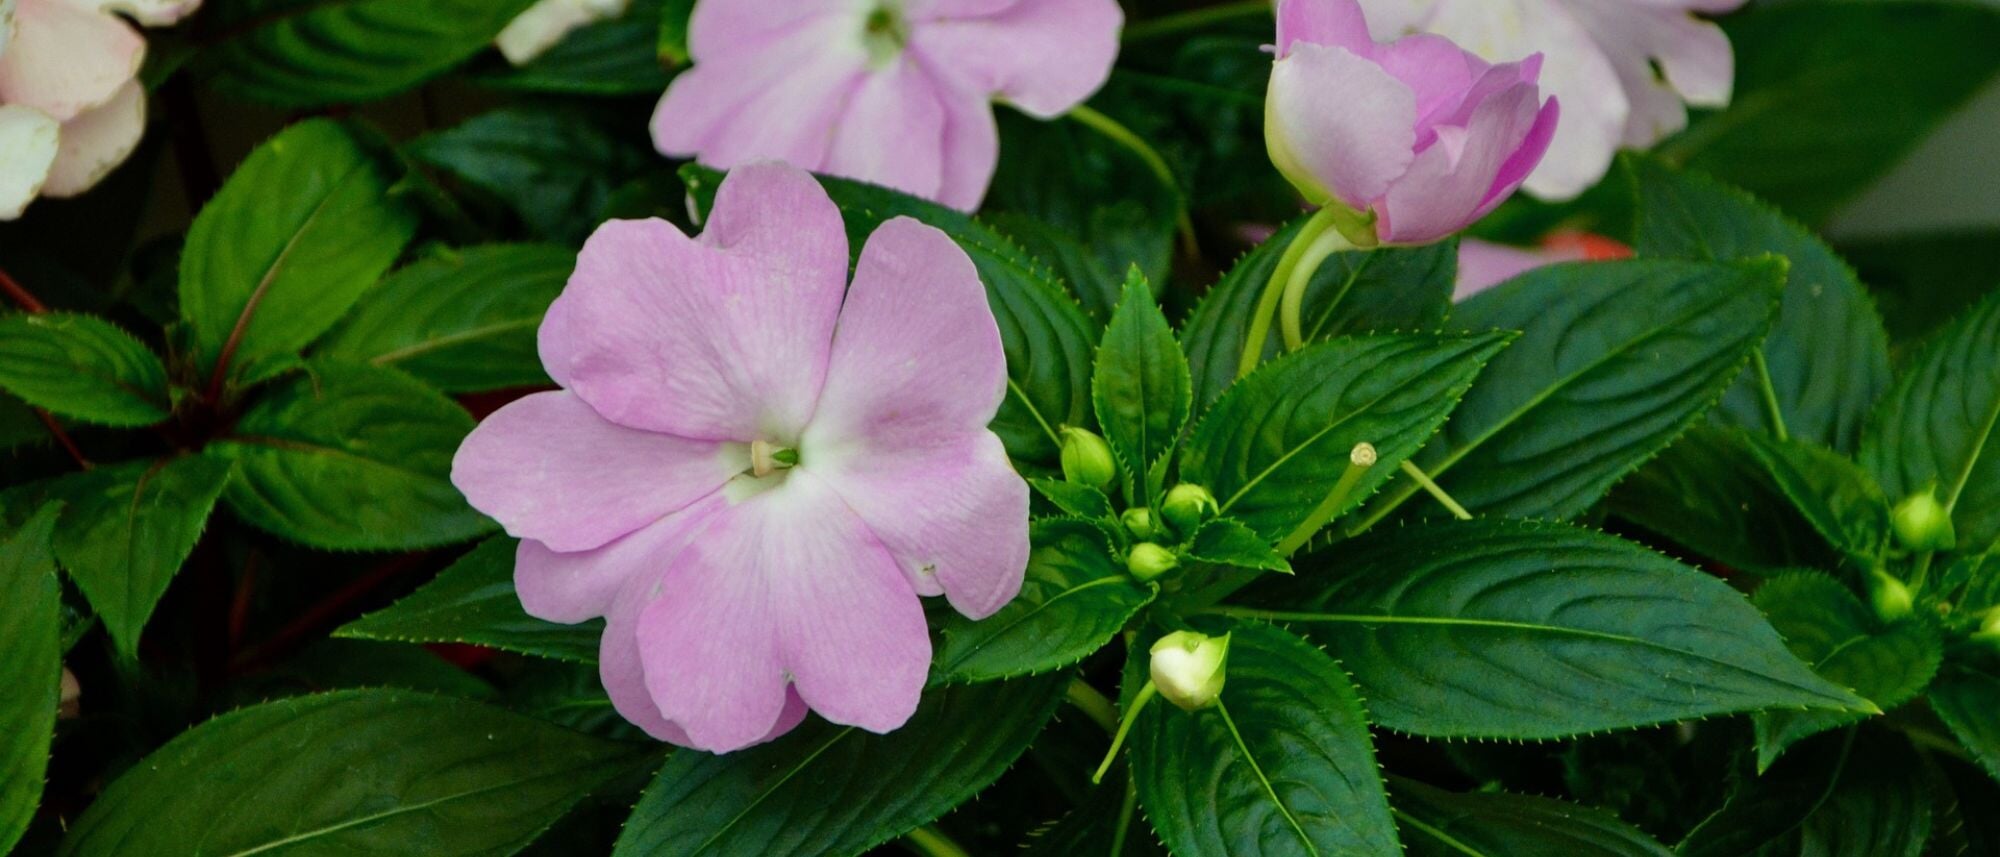 Pink impatiens flowers that are shade tolerant in the garden